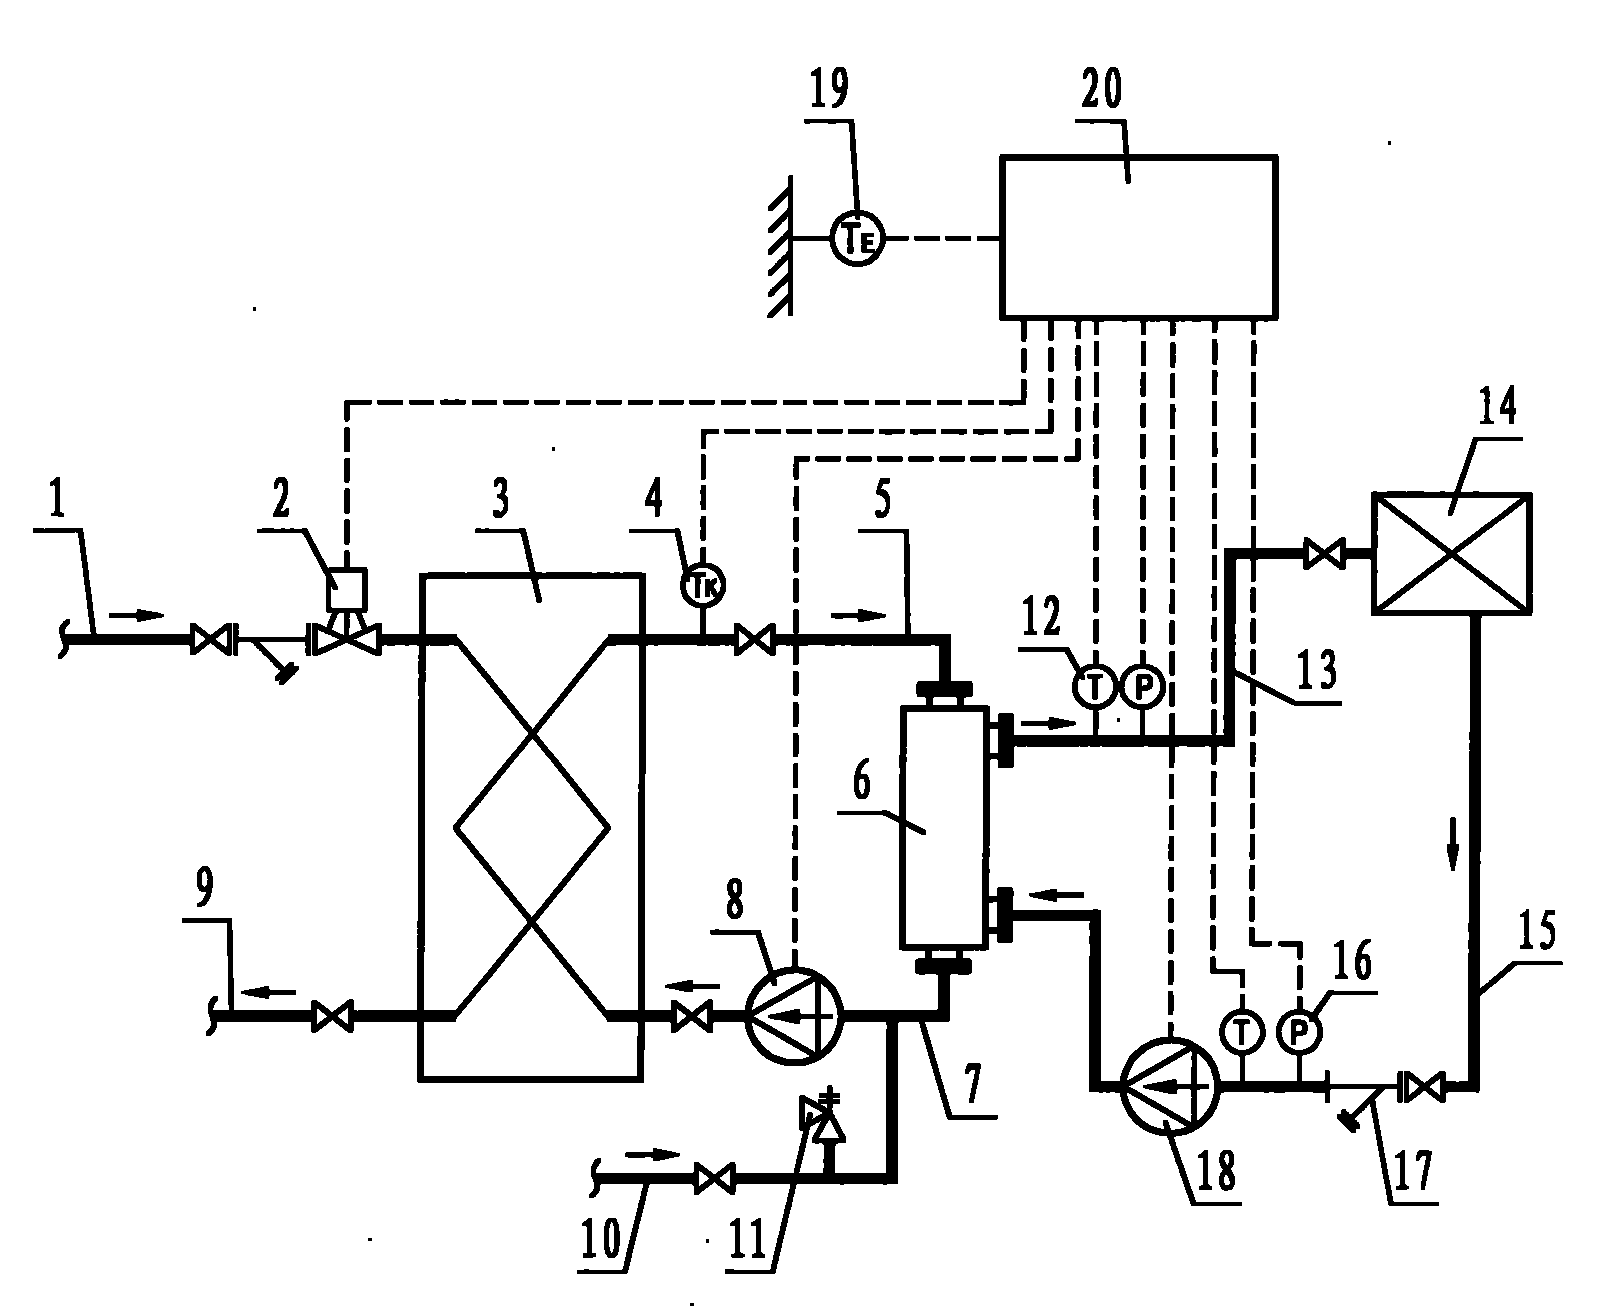 Circulating water heating system of secondary pump